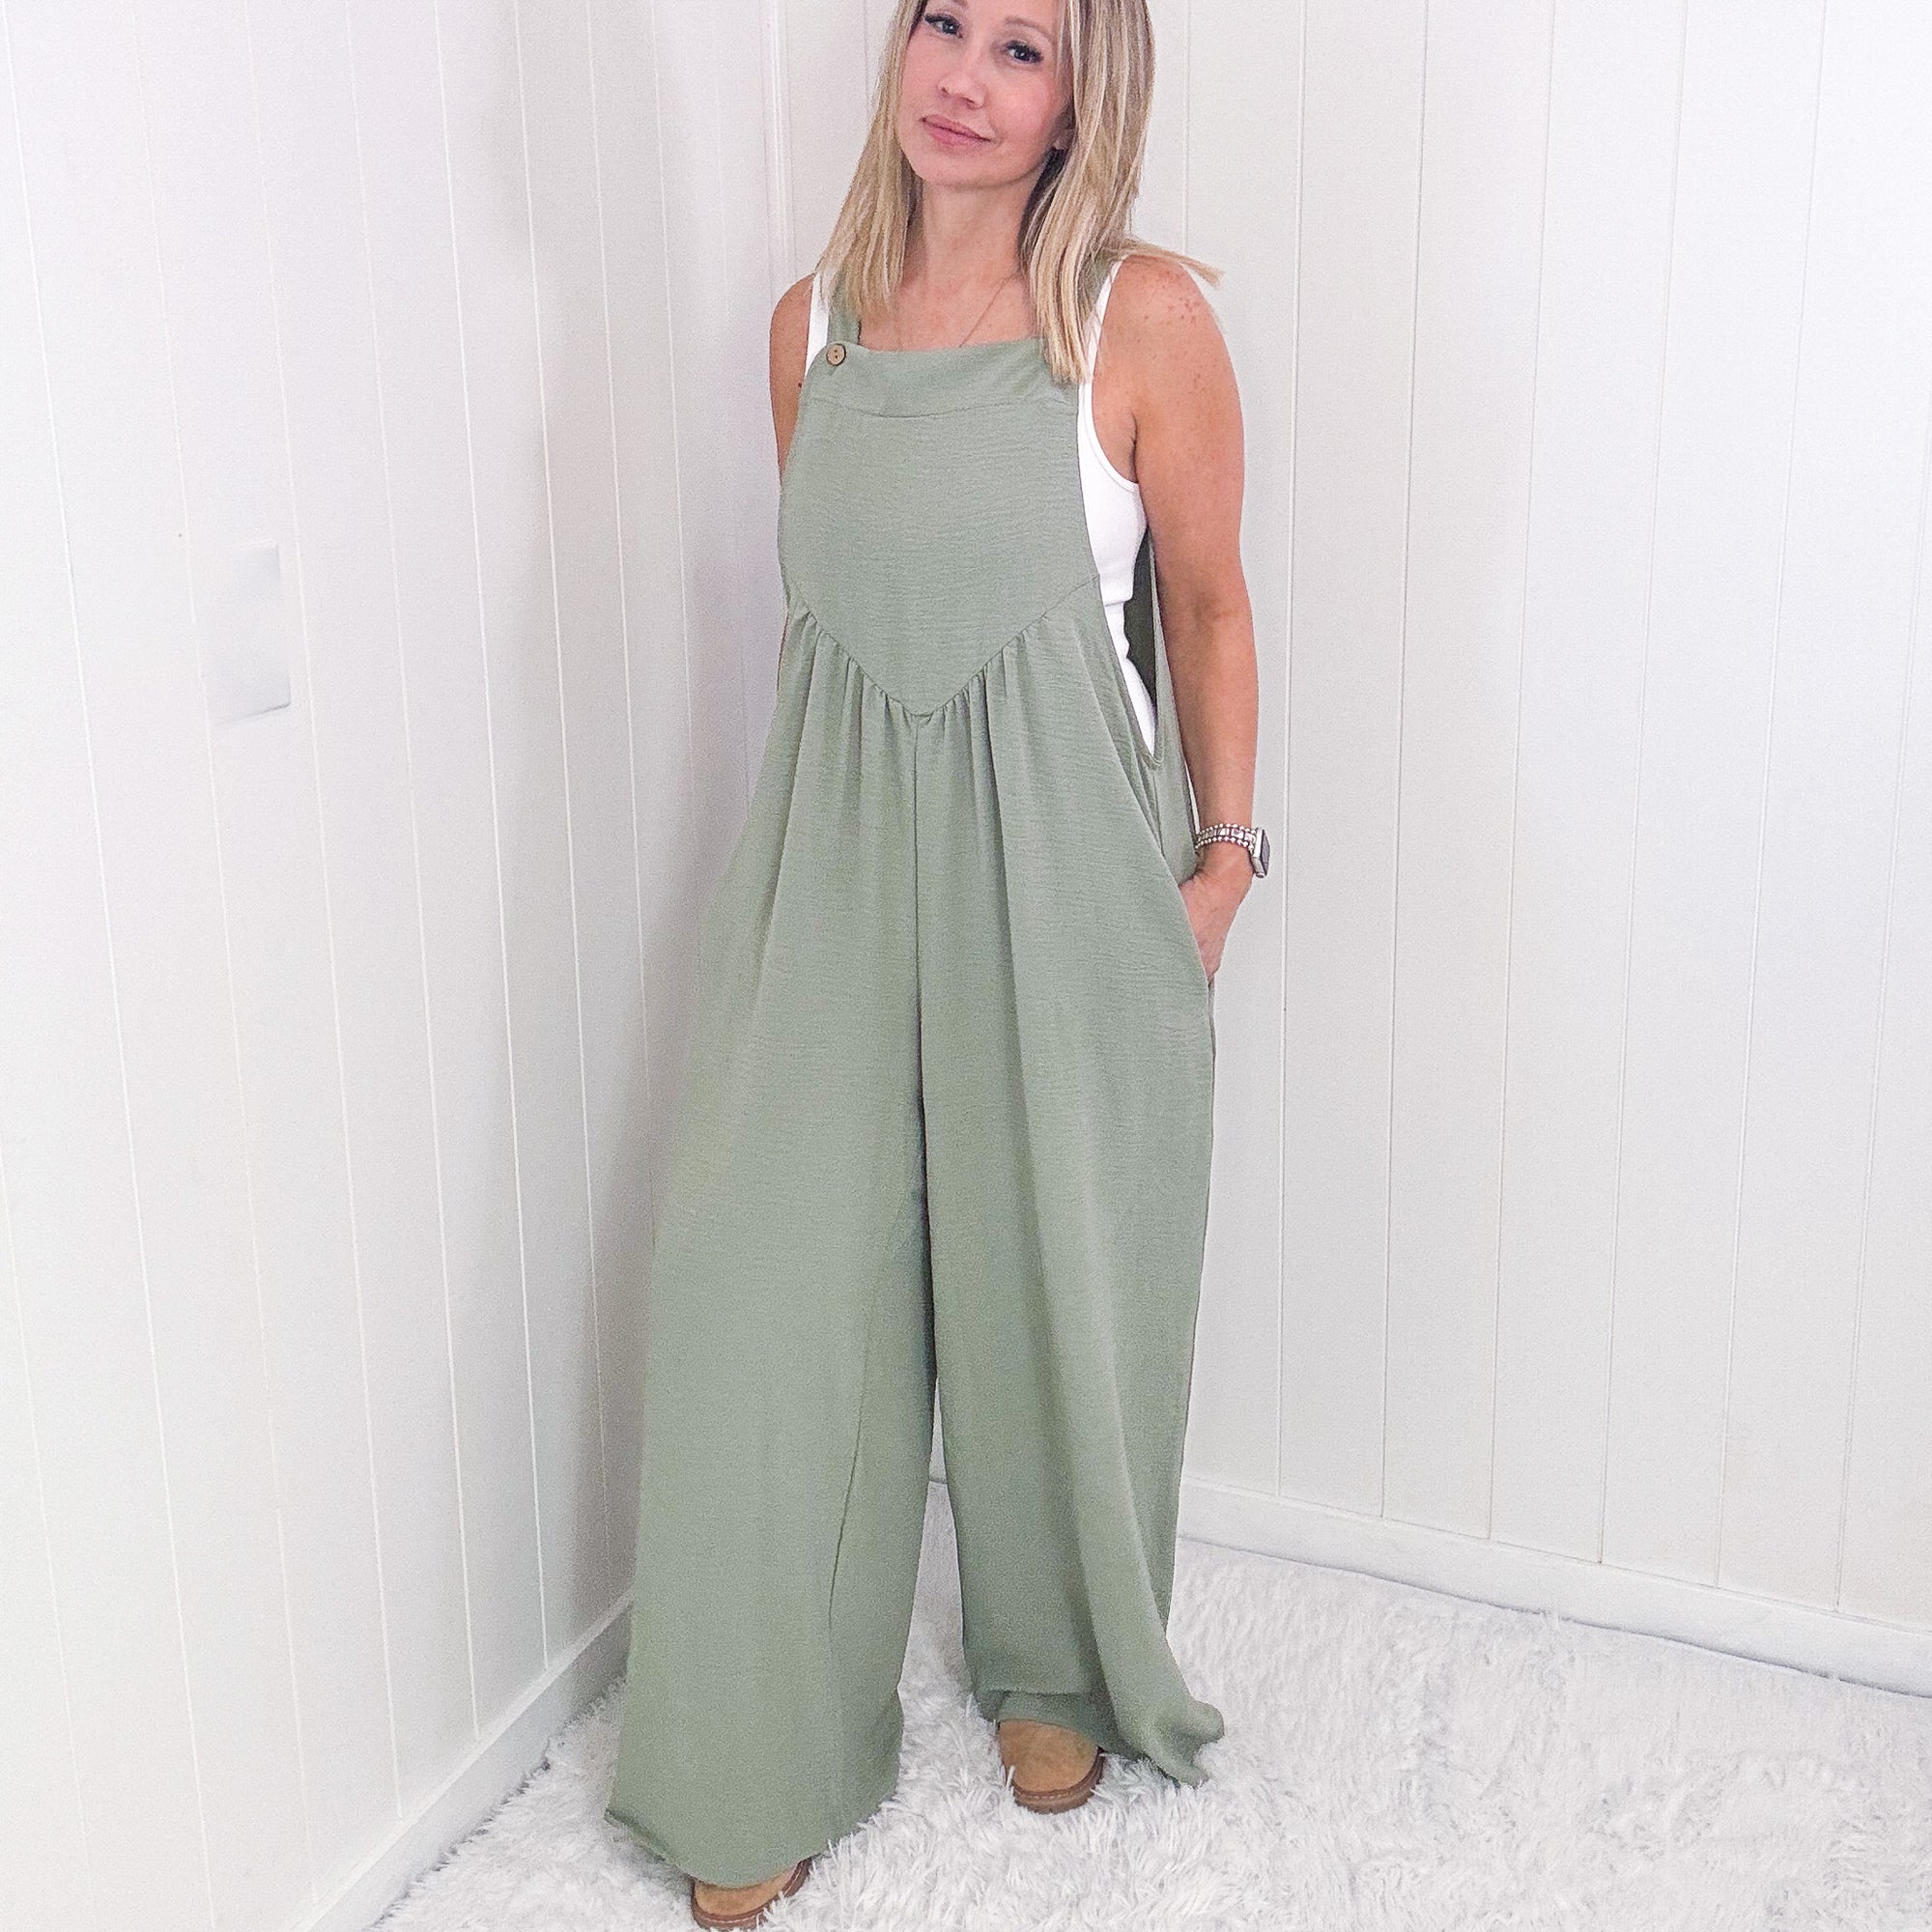 Move On Over Sage Wide Leg Suspender Overall Jumpsuit - Boujee Boutique 